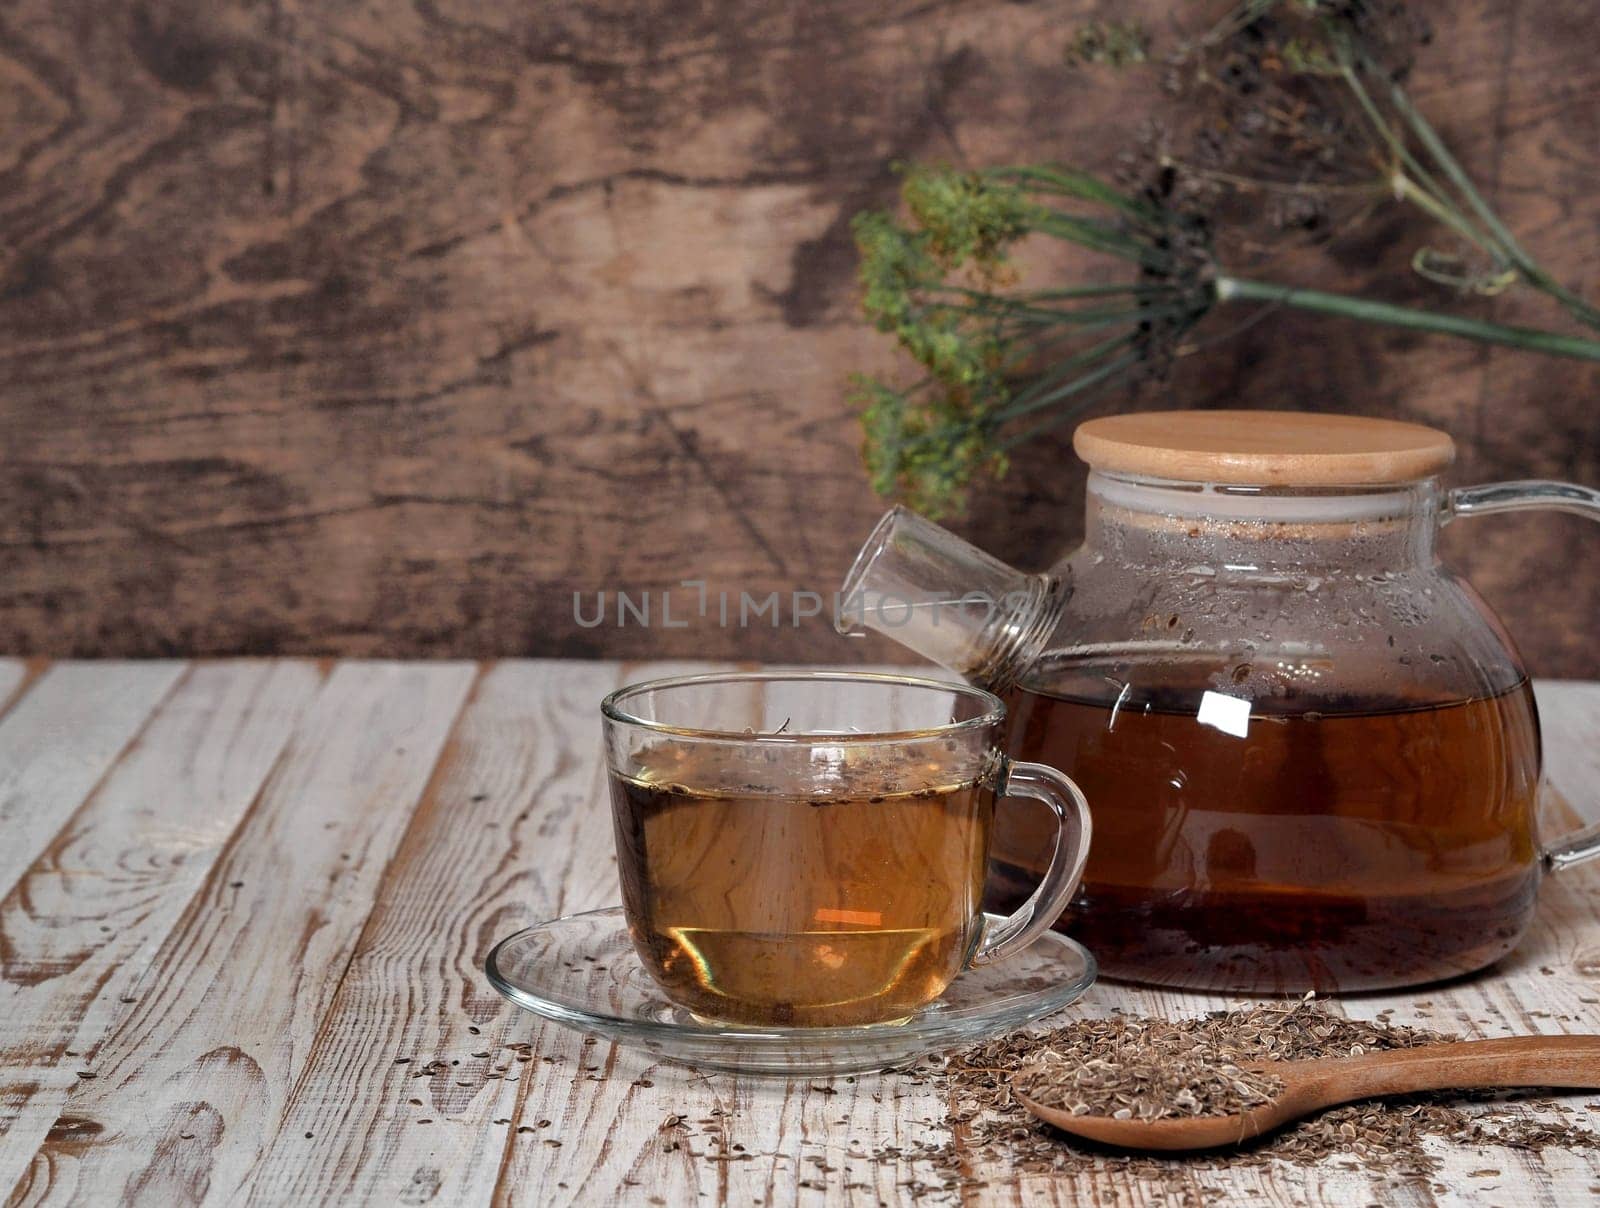 Medicinal tea using dried dill seeds in a cup and teapot on a natural wooden table.